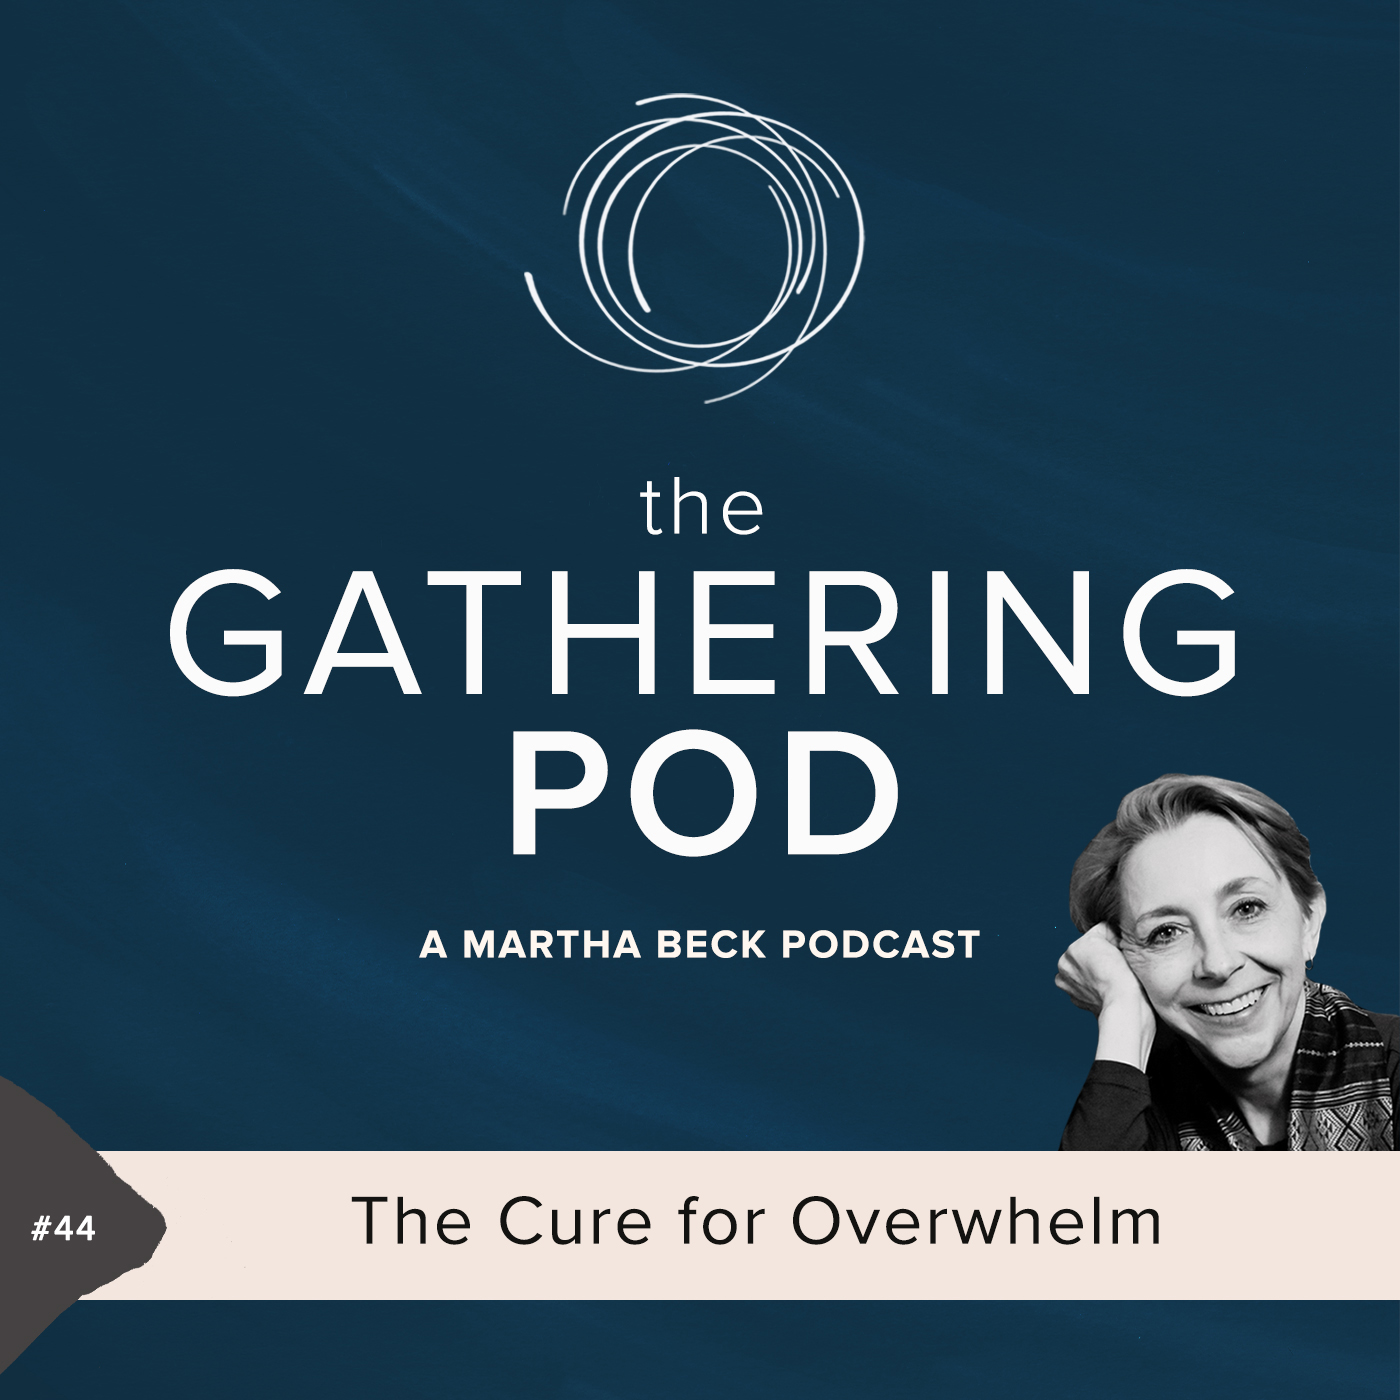 Image for The Gathering Pod A Martha Beck Podcast Episode #44 The Cure For Overwhelm